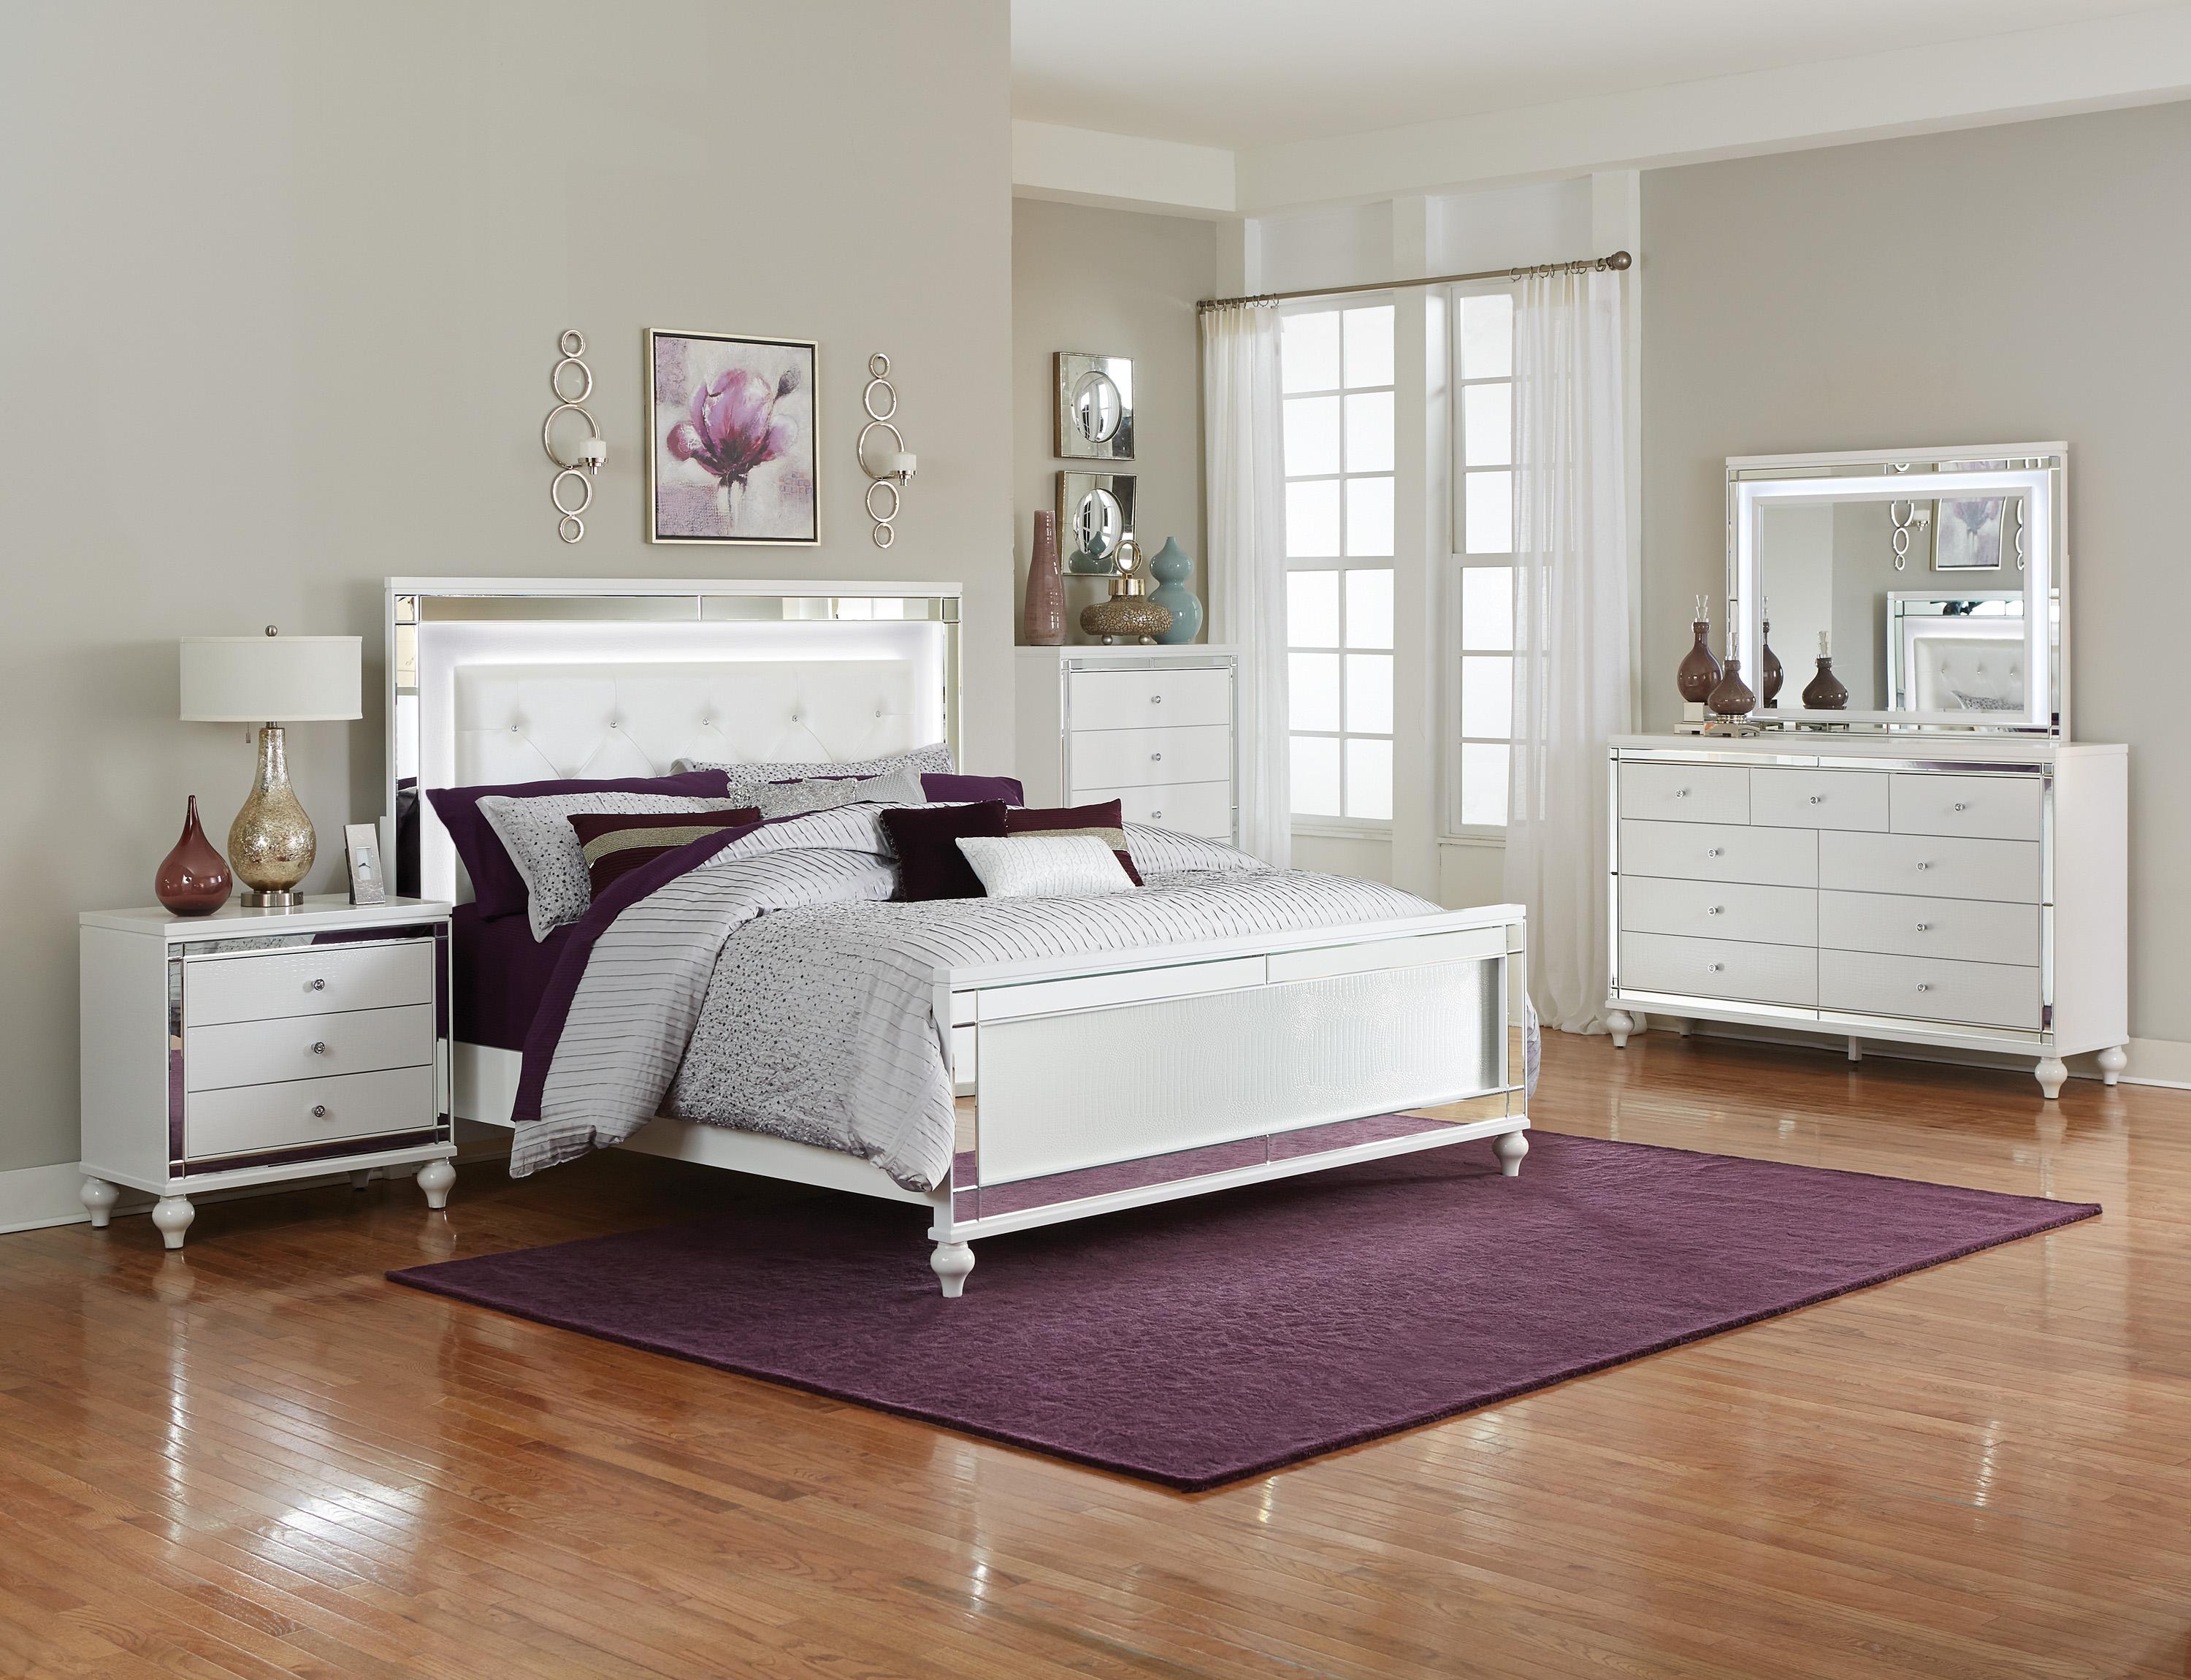 Modern Bedroom Set 1845KLED-1CK-5PC Alonza 1845KLED-1CK-5PC in White Faux Leather